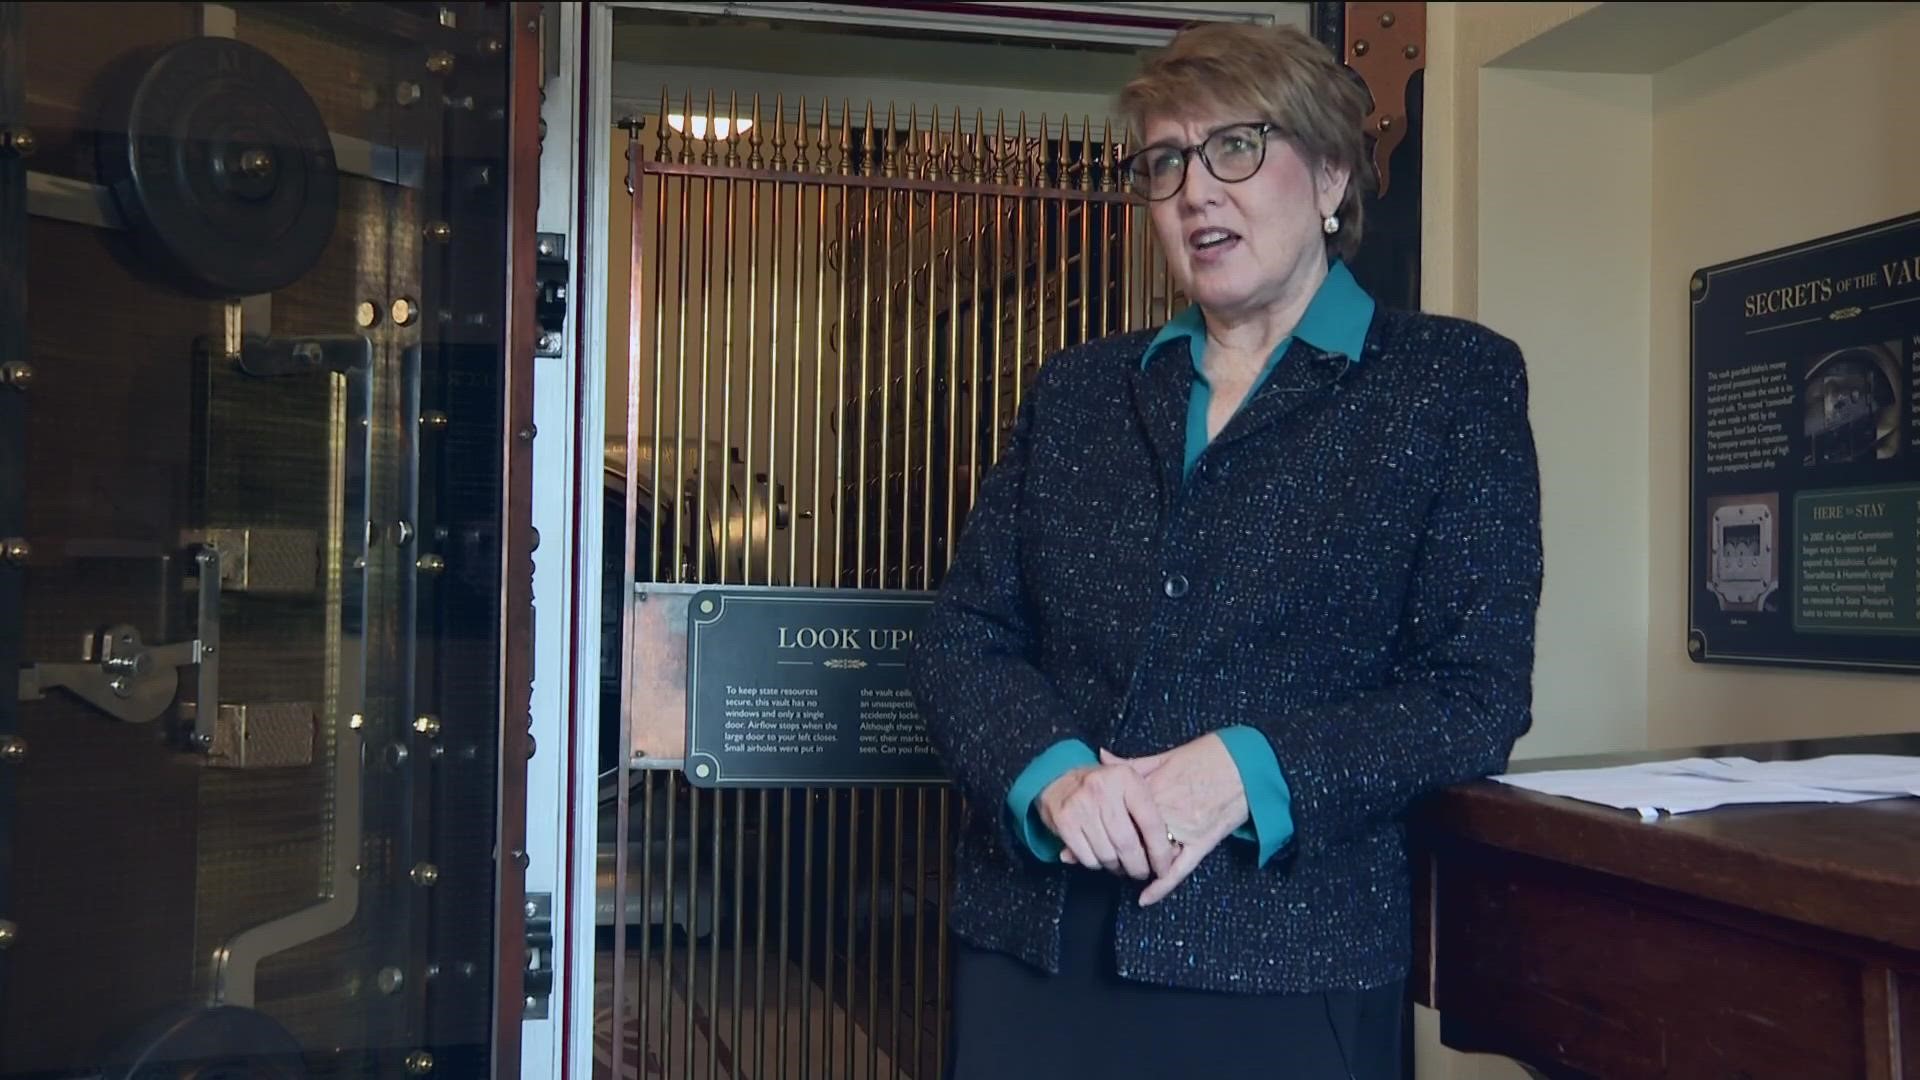 Idaho's Treasurer's Office is "bursting at the seams" with contents from over 2,300 abandoned, unclaimed safe deposit boxes collected from banks and businesses.